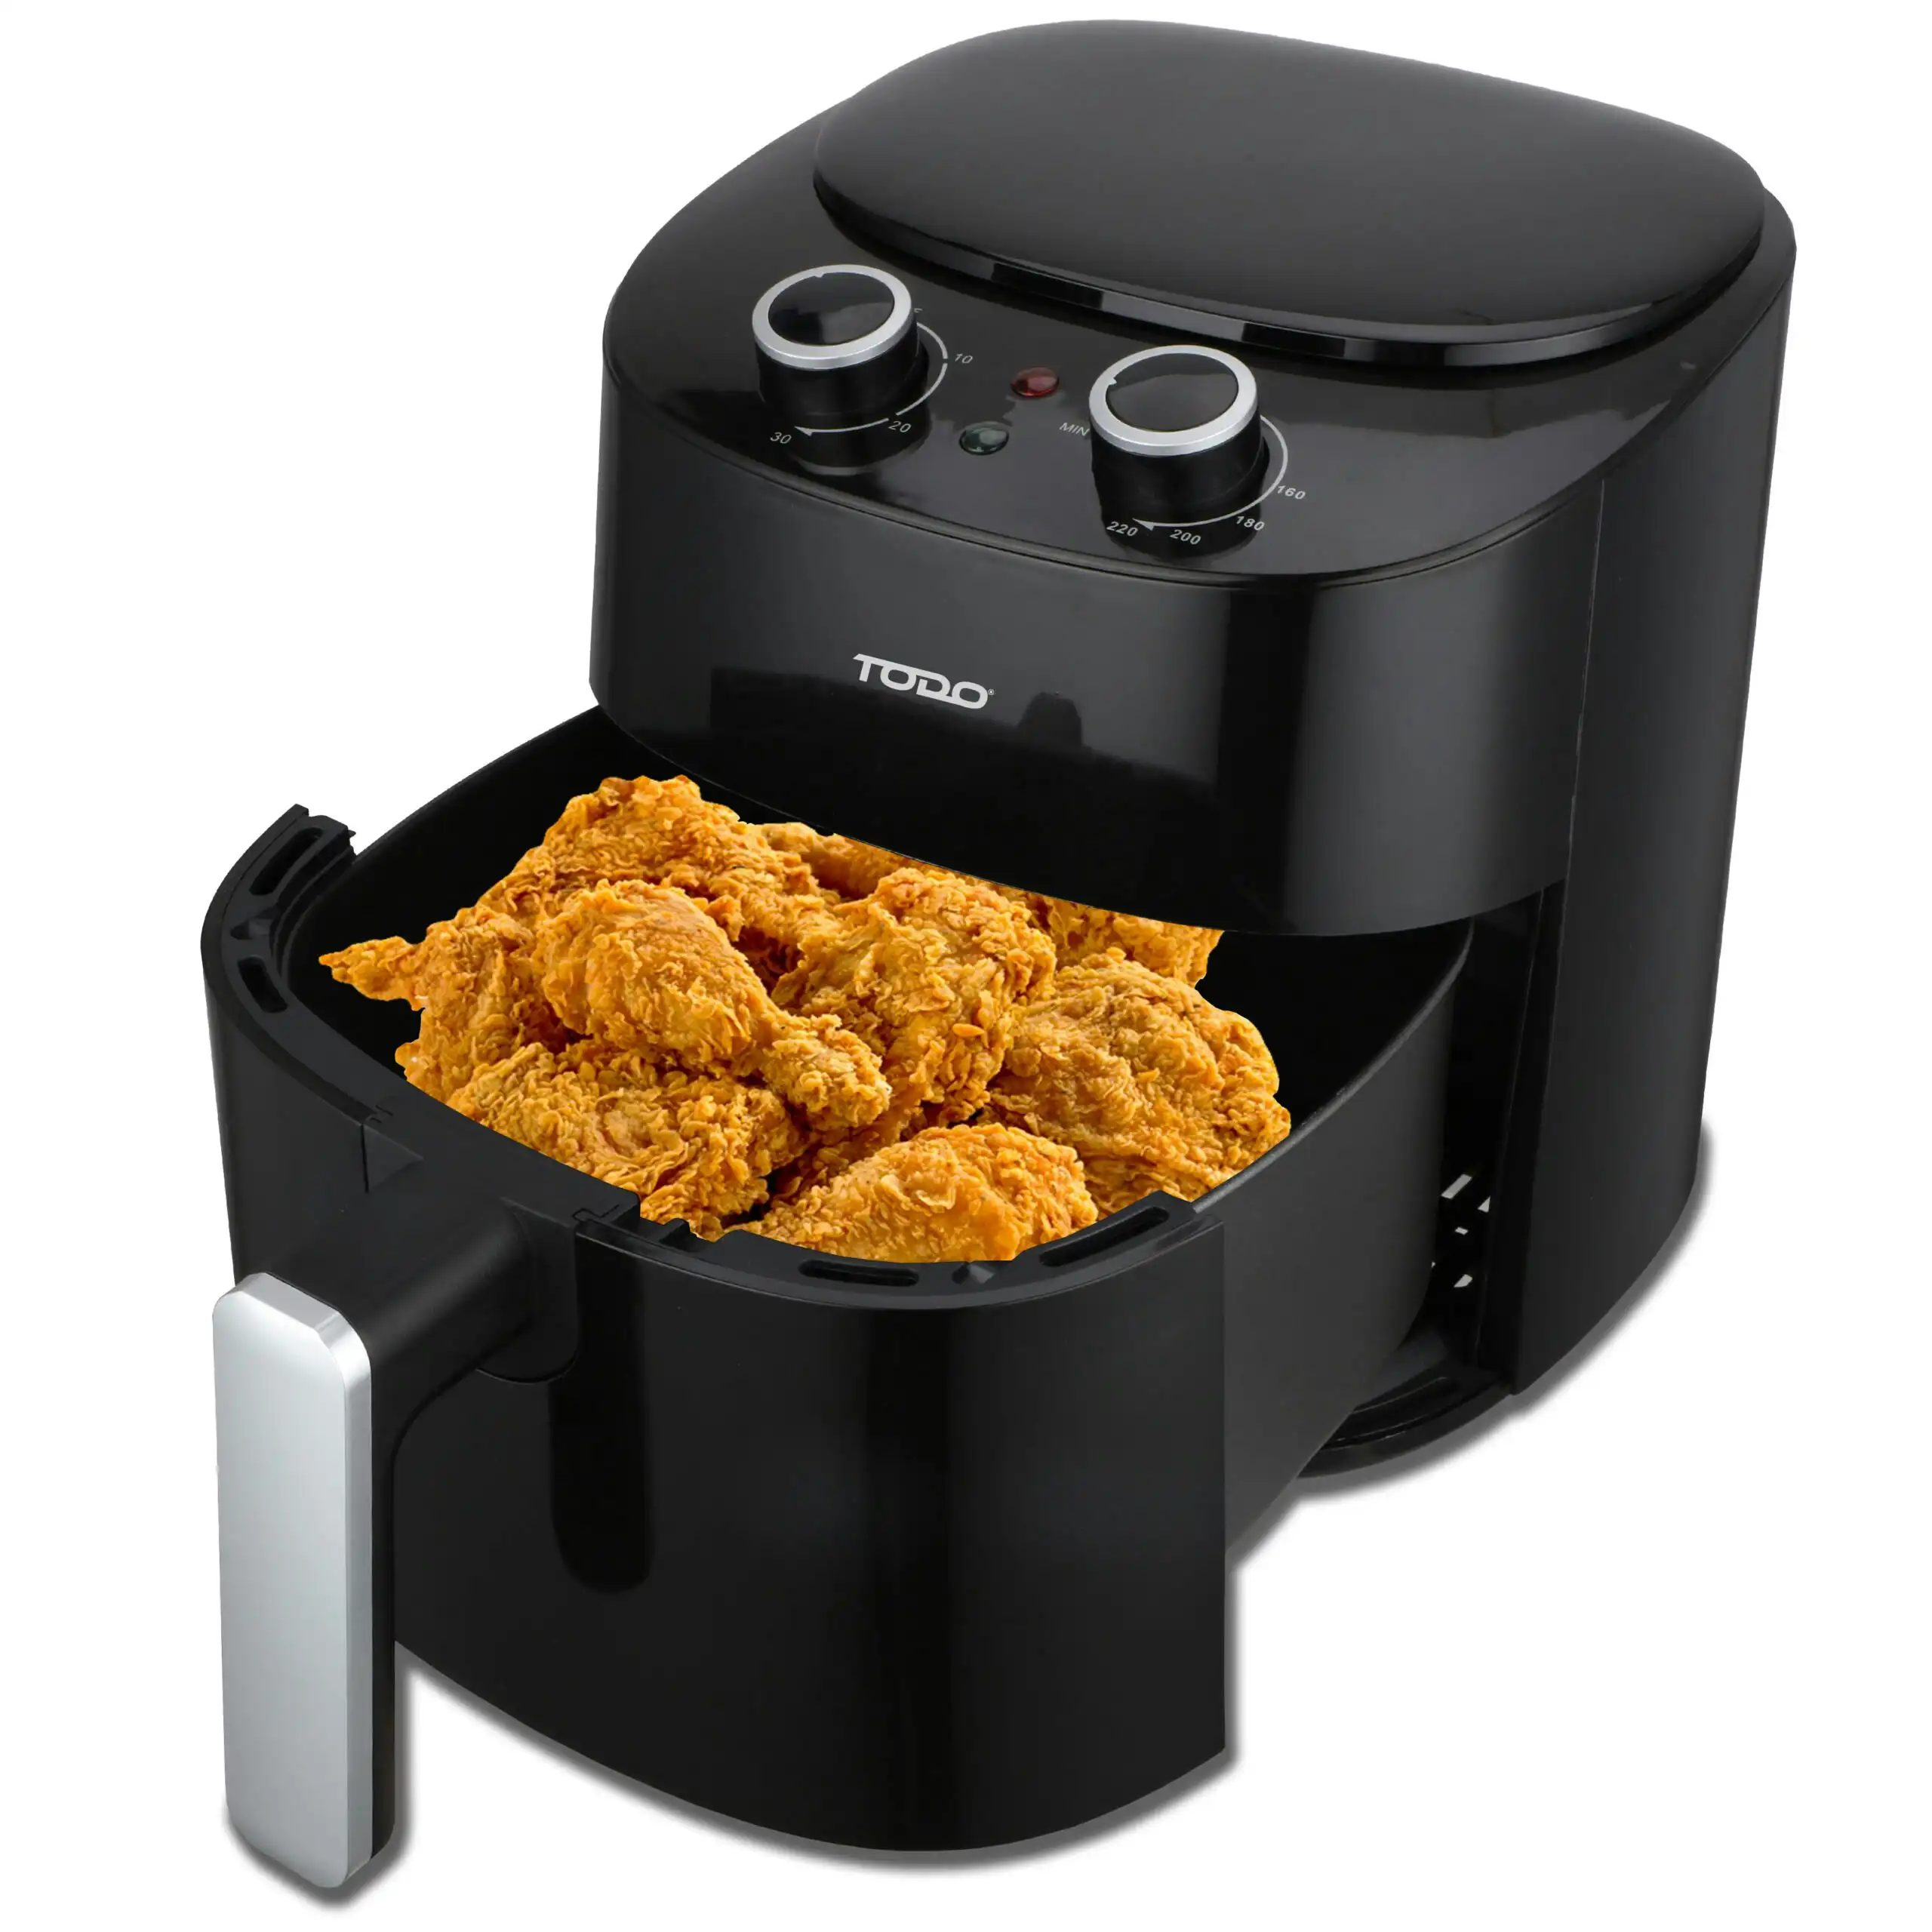 Todo 4.2L Air Fryer 1300W Convection Oven Fan Forced Multi Function Cooker Analog – Black